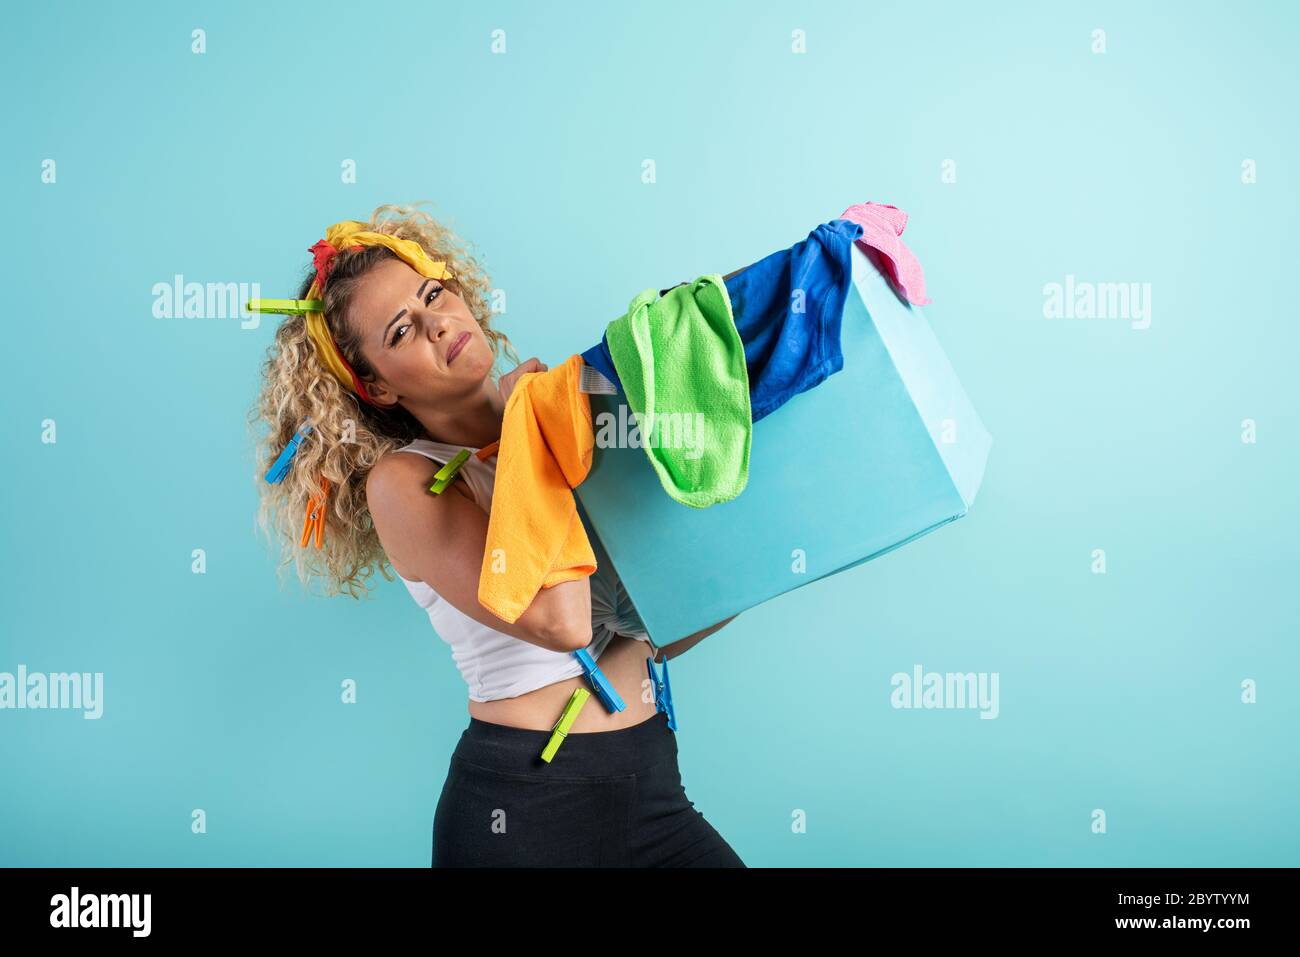 Tired housewife full of clothes and cloths to clean. cyan background Stock Photo